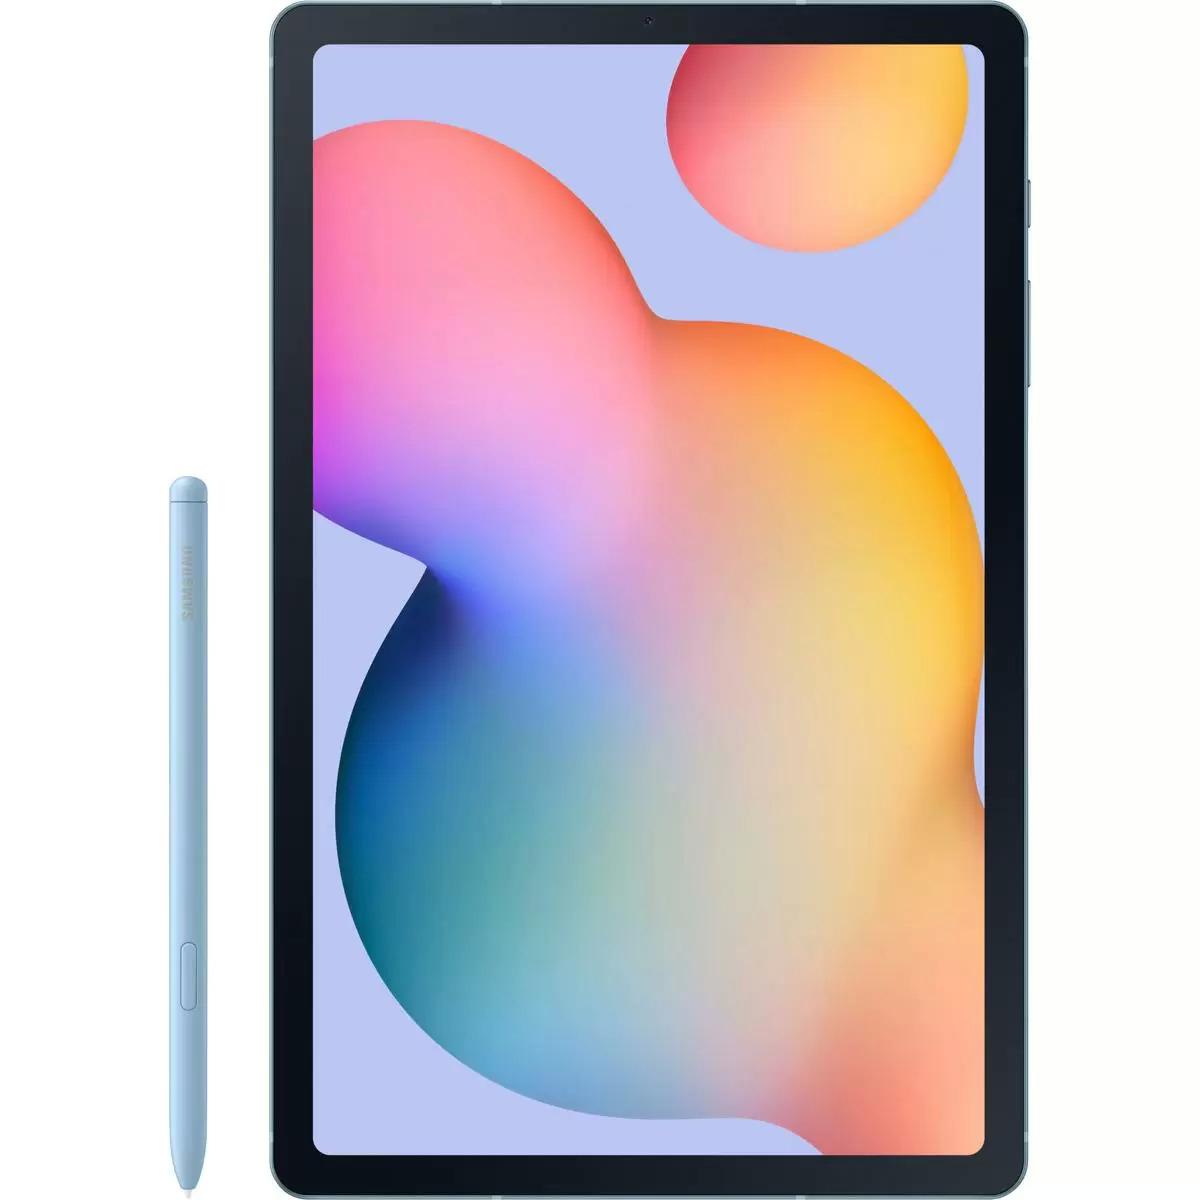 Samsung Galaxy Tab S6 Lite 10.4in 64GB Wifi Tablet with S Pen for $219.99 Shipped